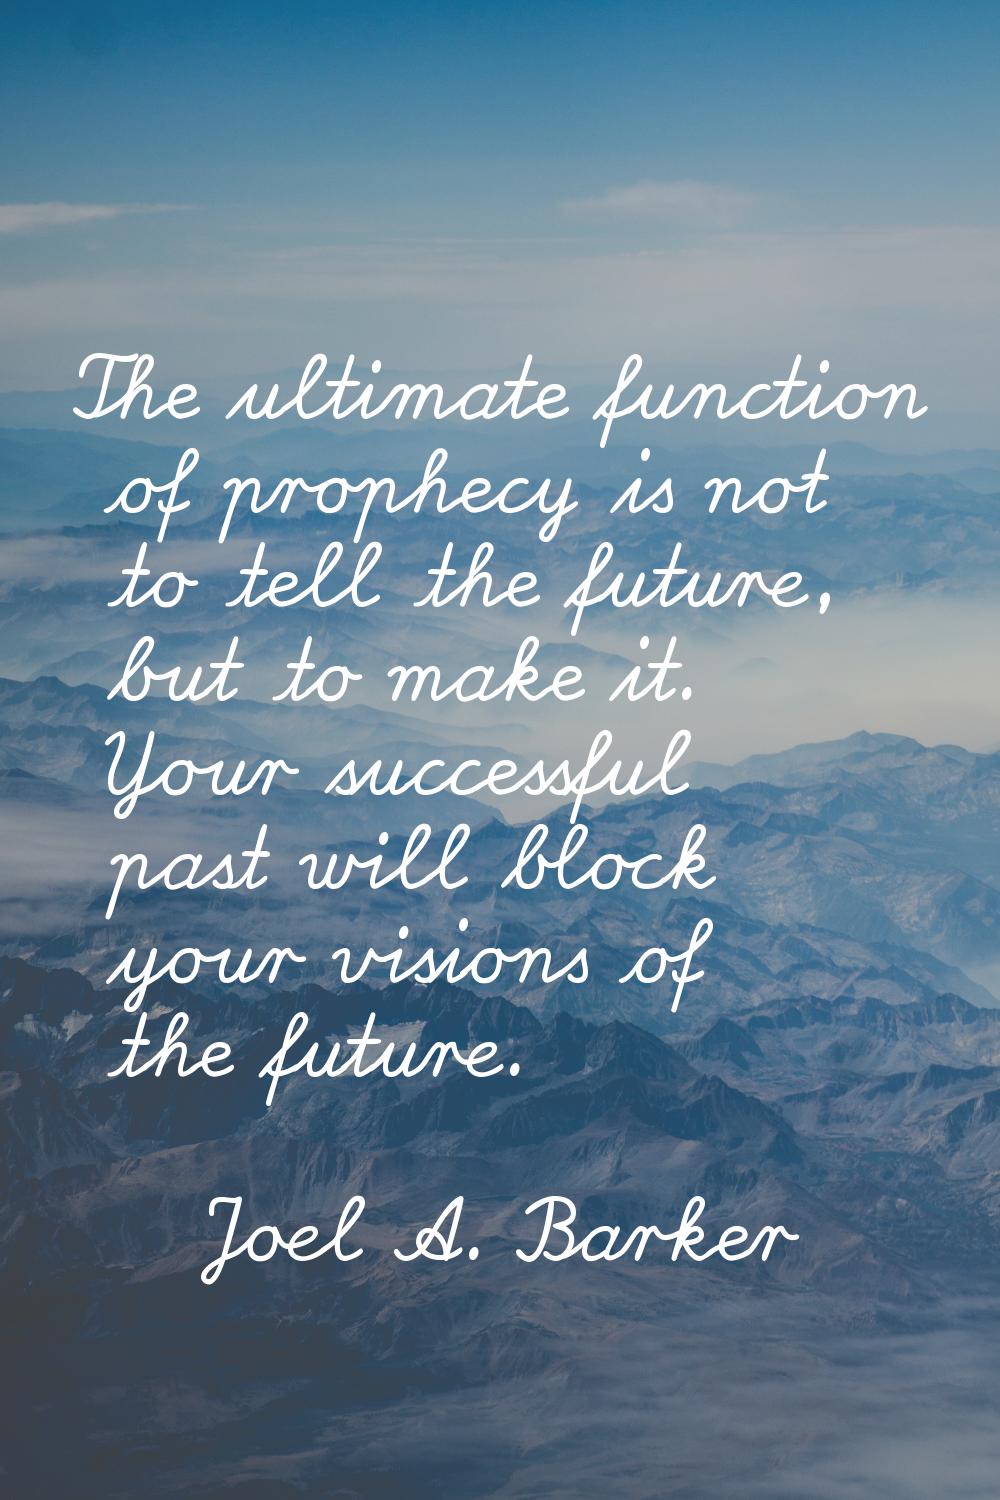 The ultimate function of prophecy is not to tell the future, but to make it. Your successful past w